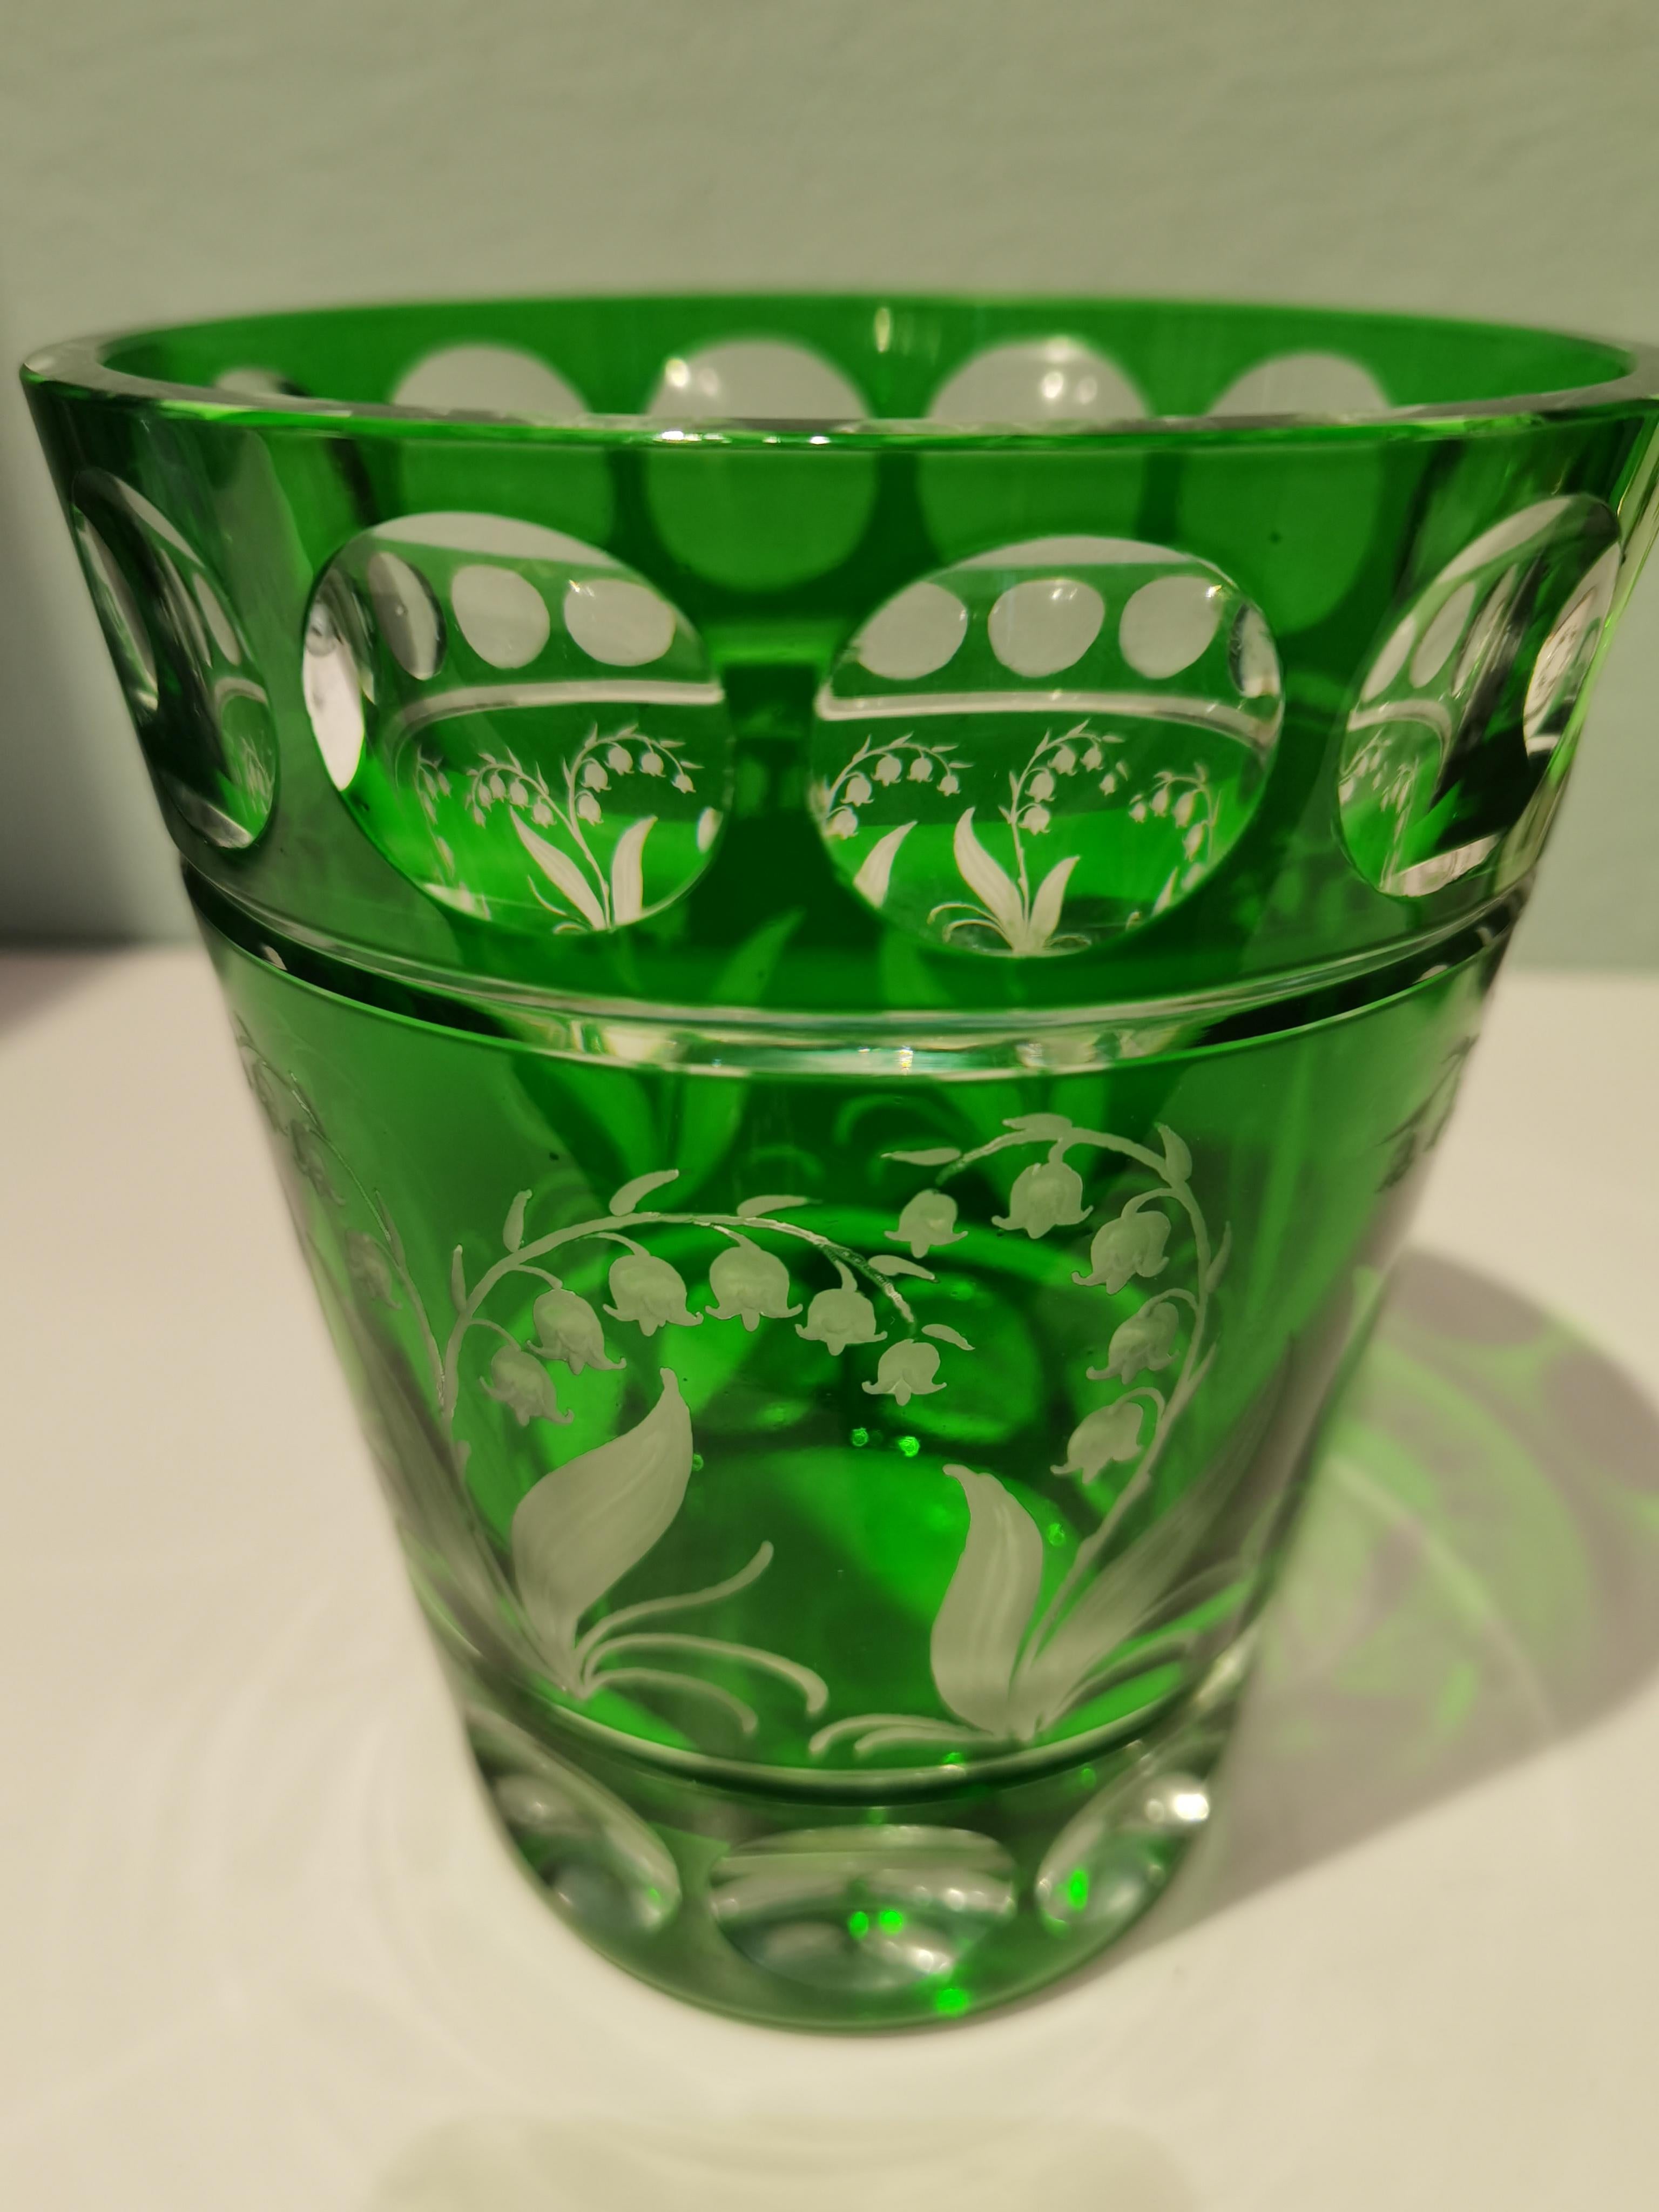 Hand blown crystal vase in green with a hand-engraved lily of the valley decor all-around in a country style. Entirely handmade crystal glass. Hand blown and hands-free engraved in Bavaria Germany. The crystal here shown comes in a light green and